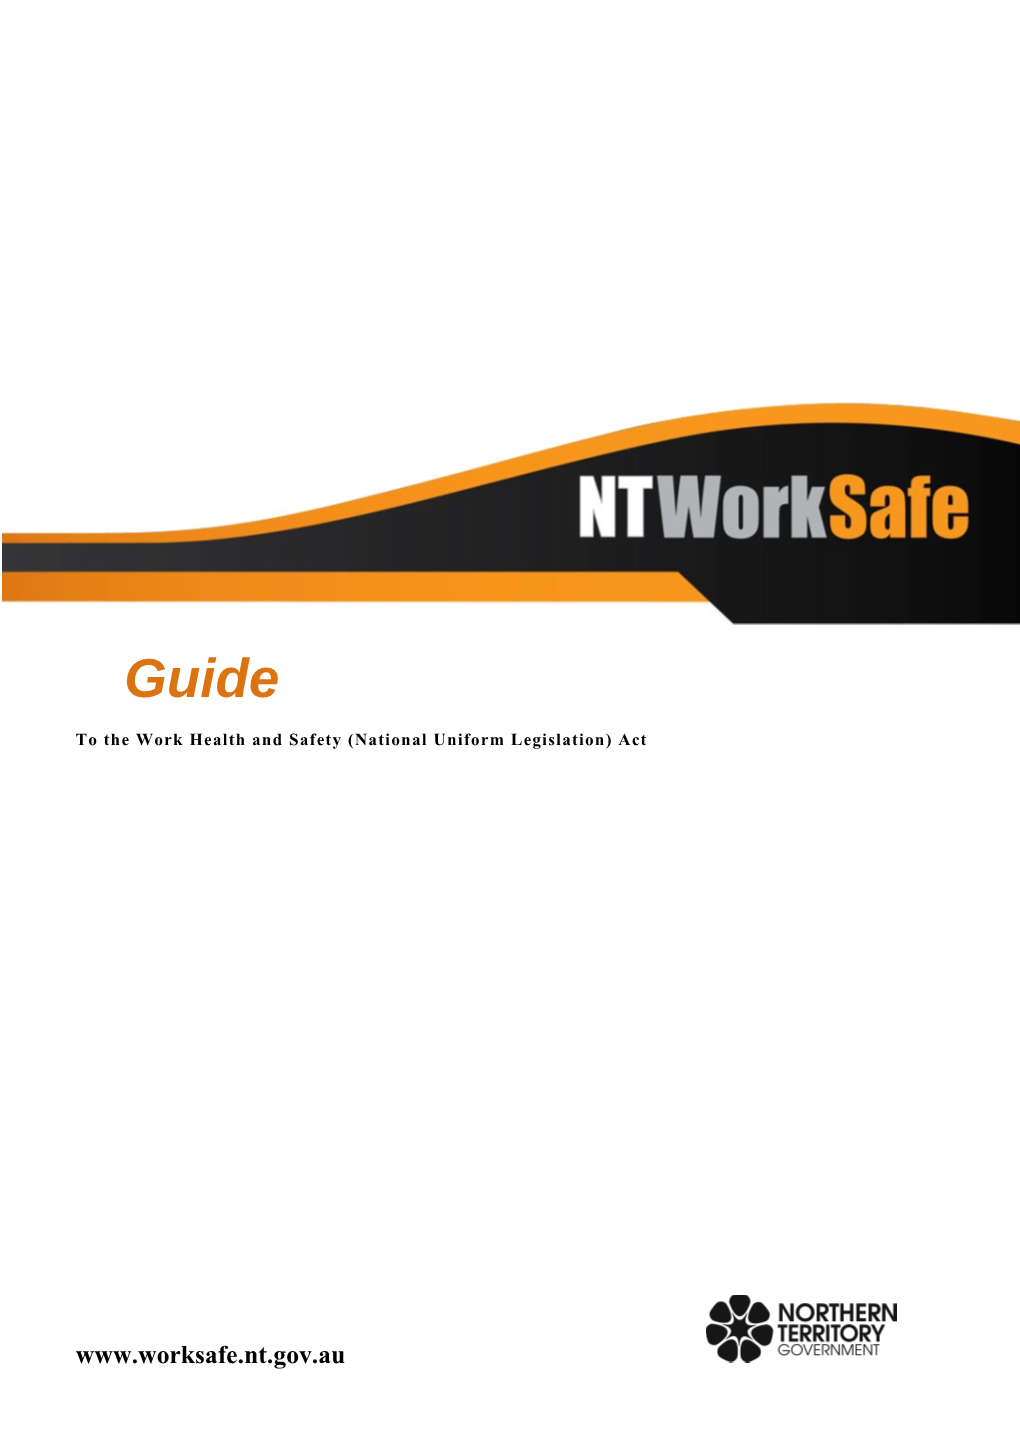 Guide to the Work Health and Safety Act